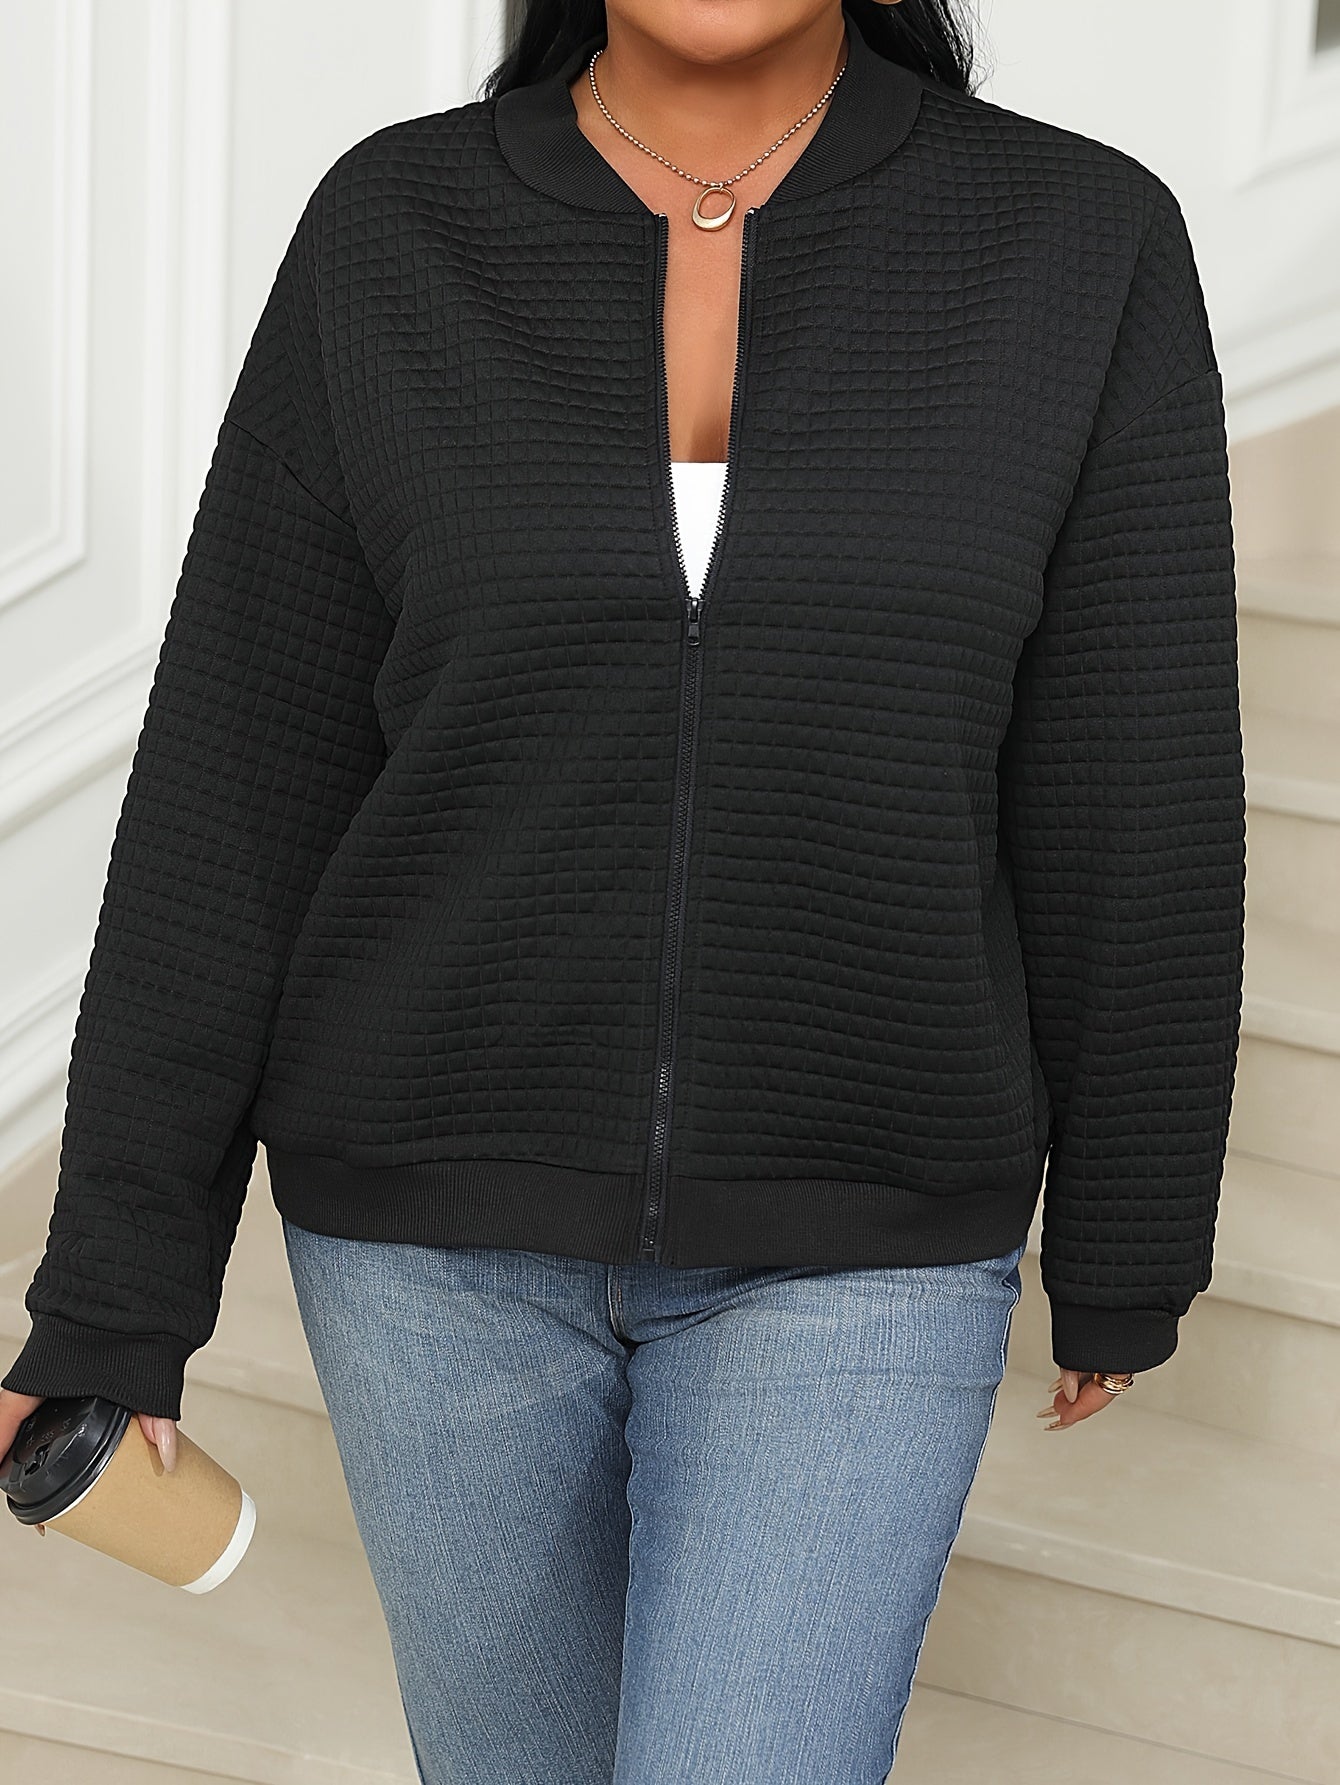 Plus Size Casual Jacket, Women's Plus Solid Textured Zipper Long Sleeve Slight Stretch Bomber Jacket